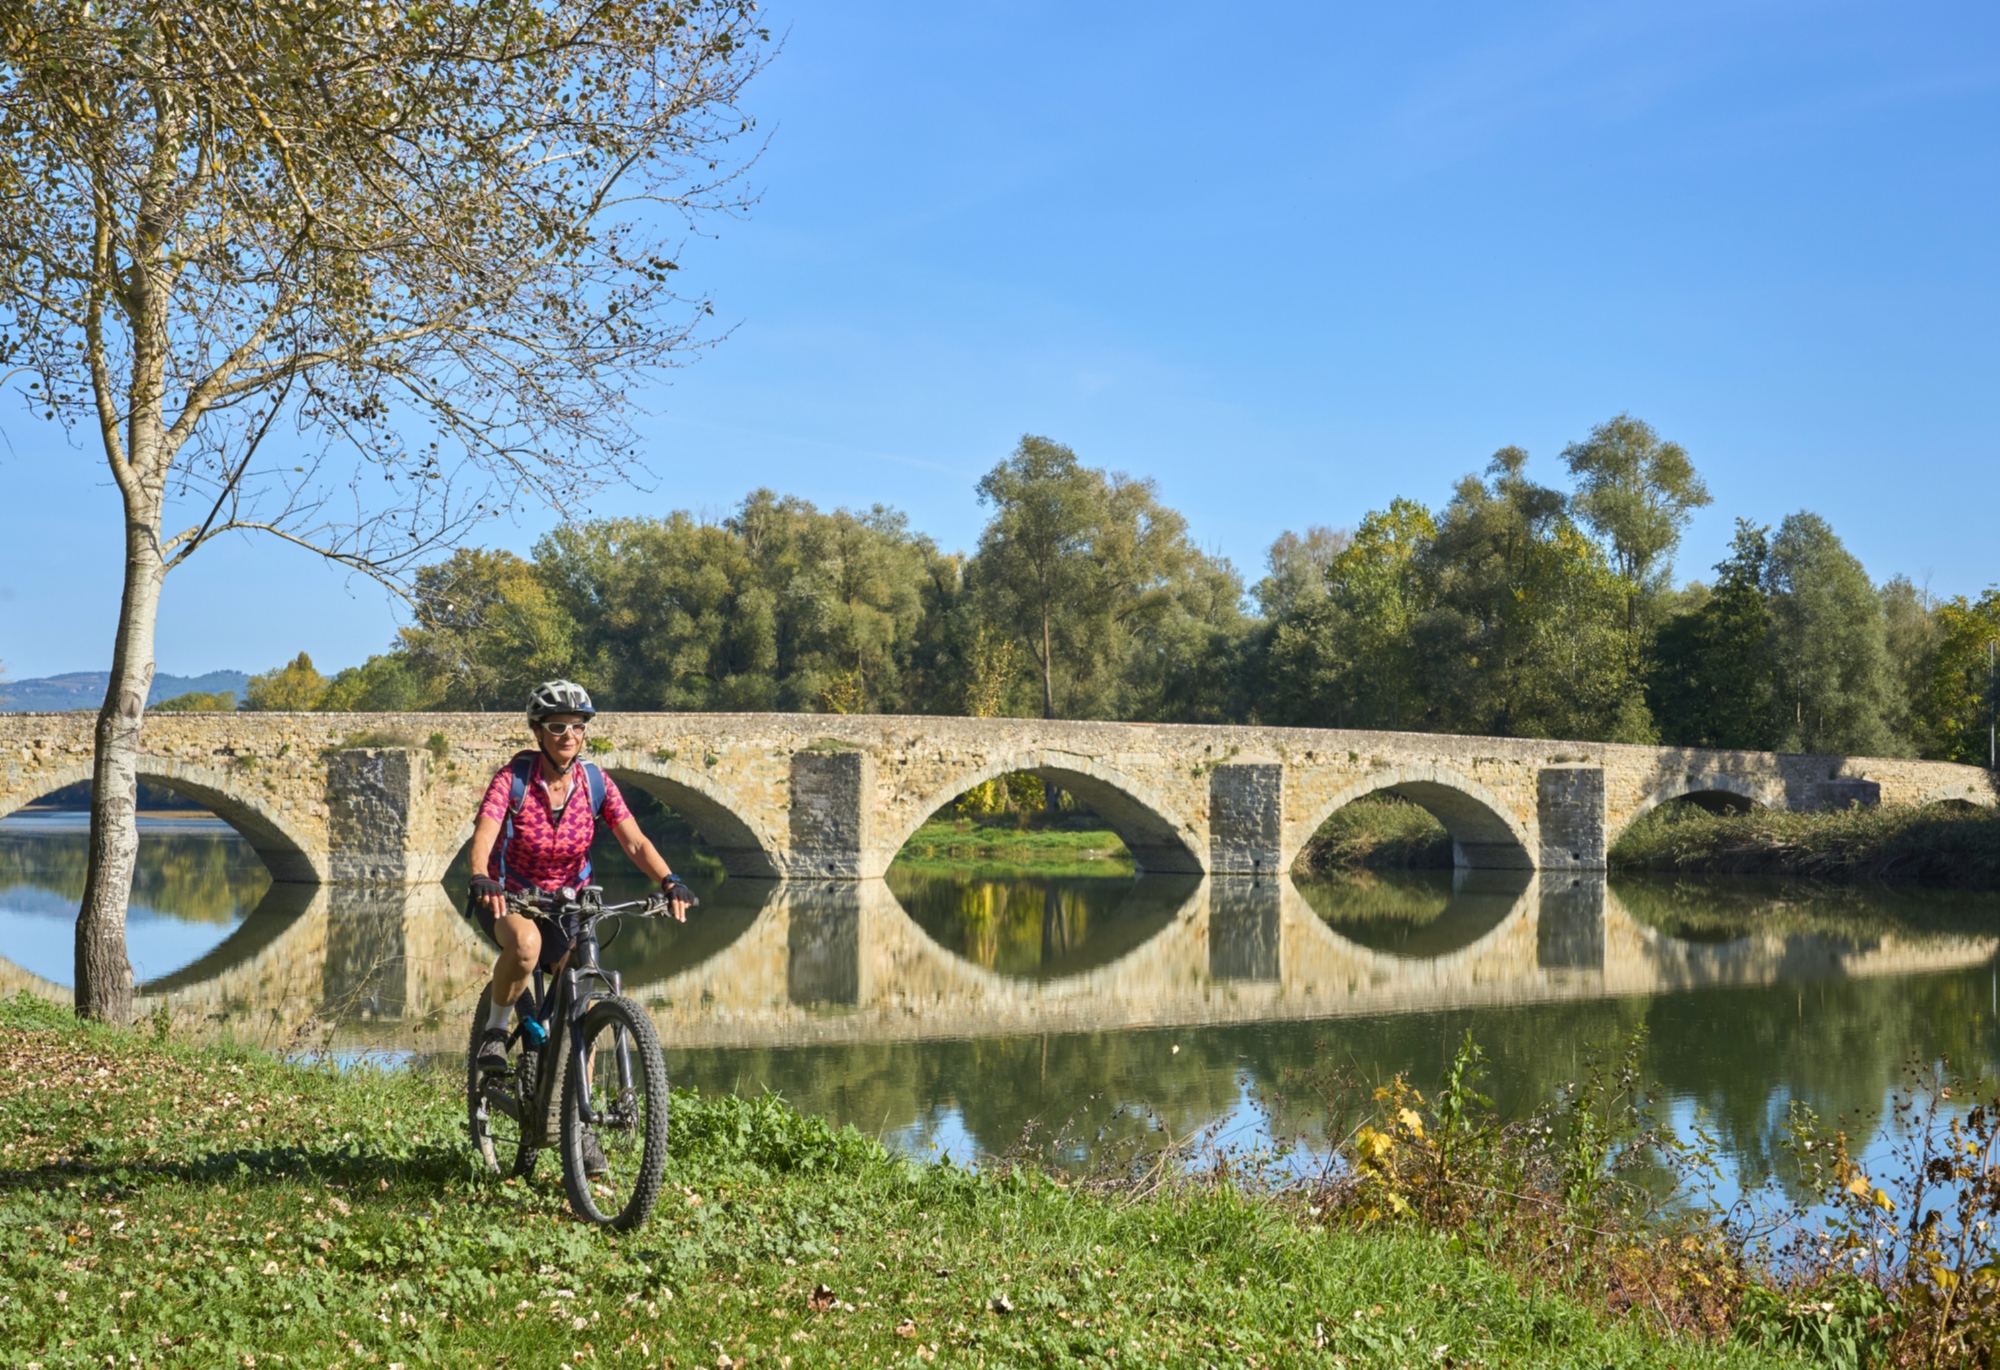 From Lucca to Pisa e-bike tour with picnic lunch